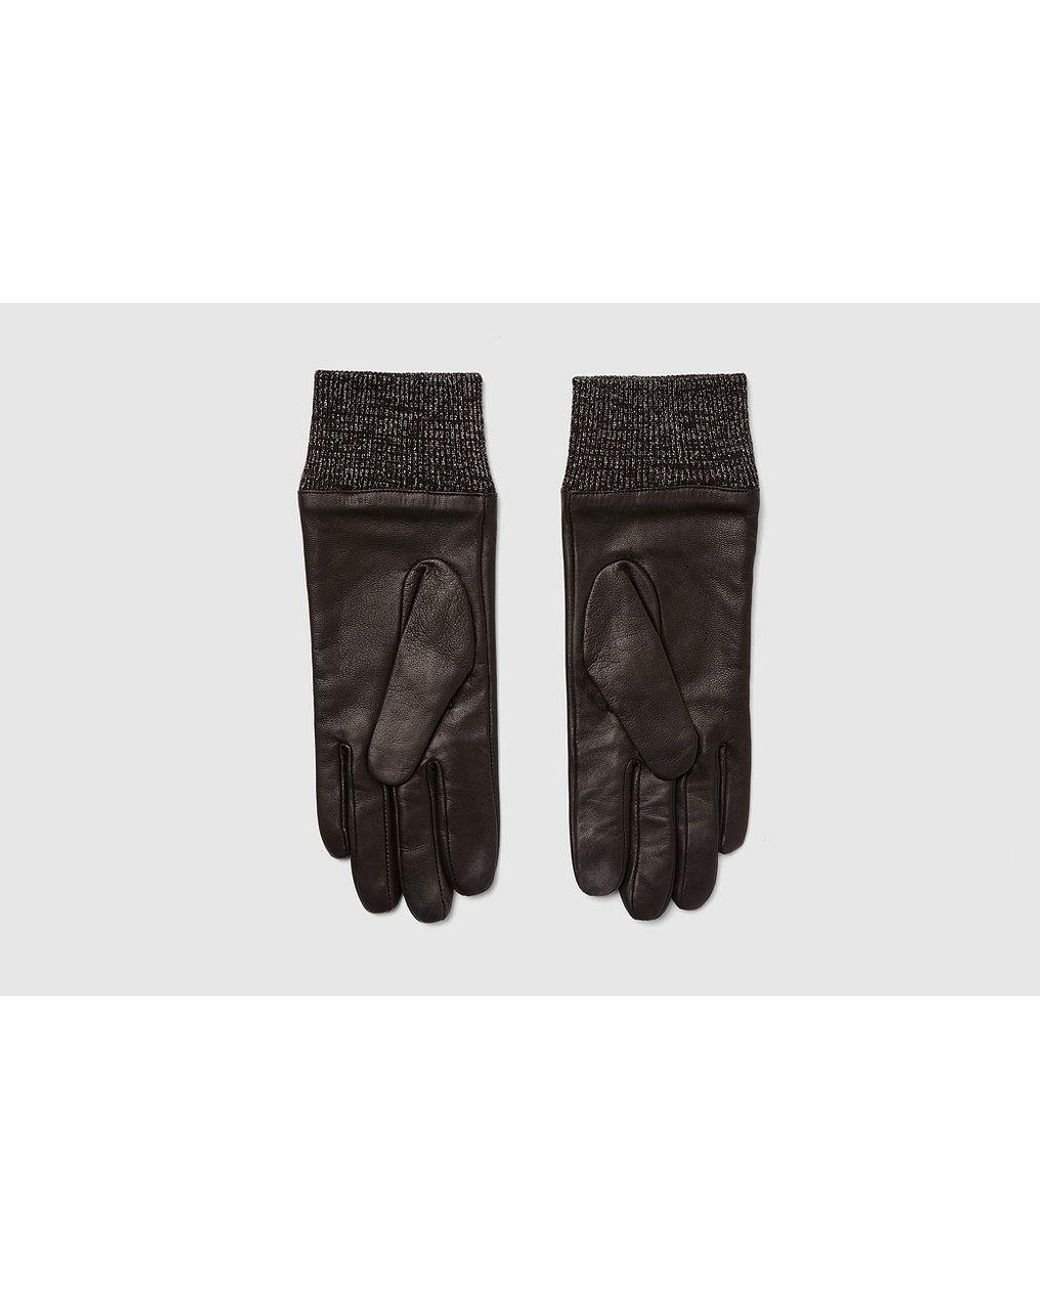 Mabel Sheppard Leather Happy Gloves in Black - Lyst